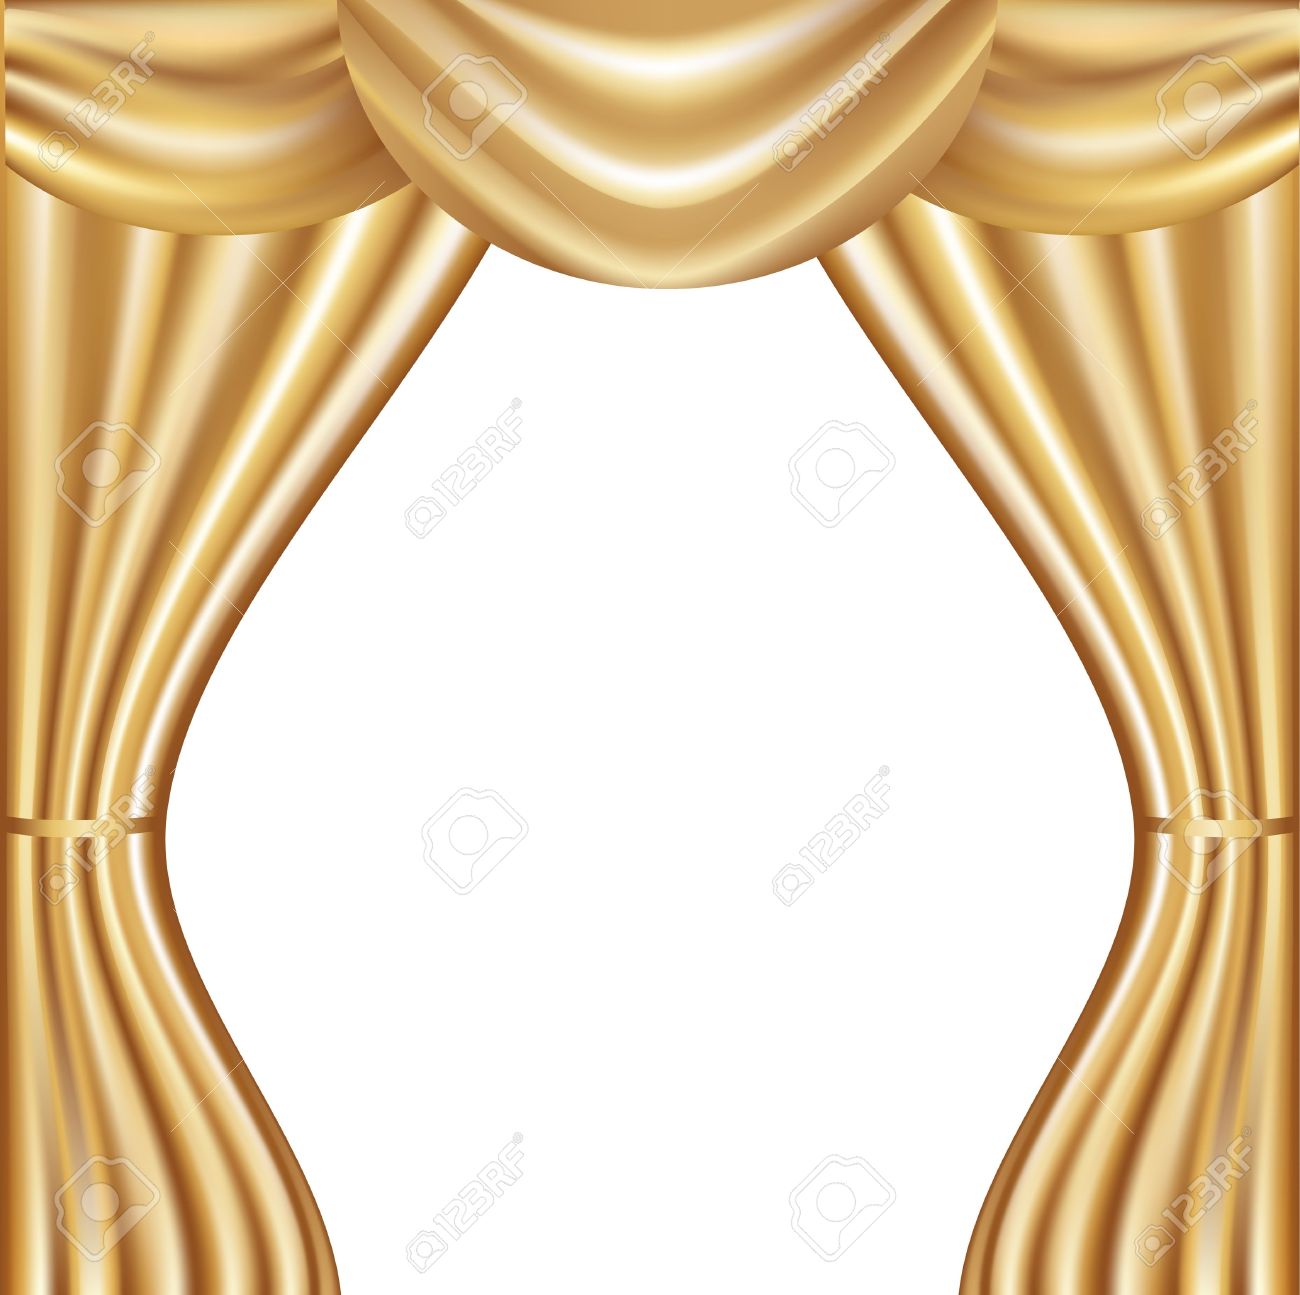 Free Golden Clipart curtains, Download Free Clip Art on